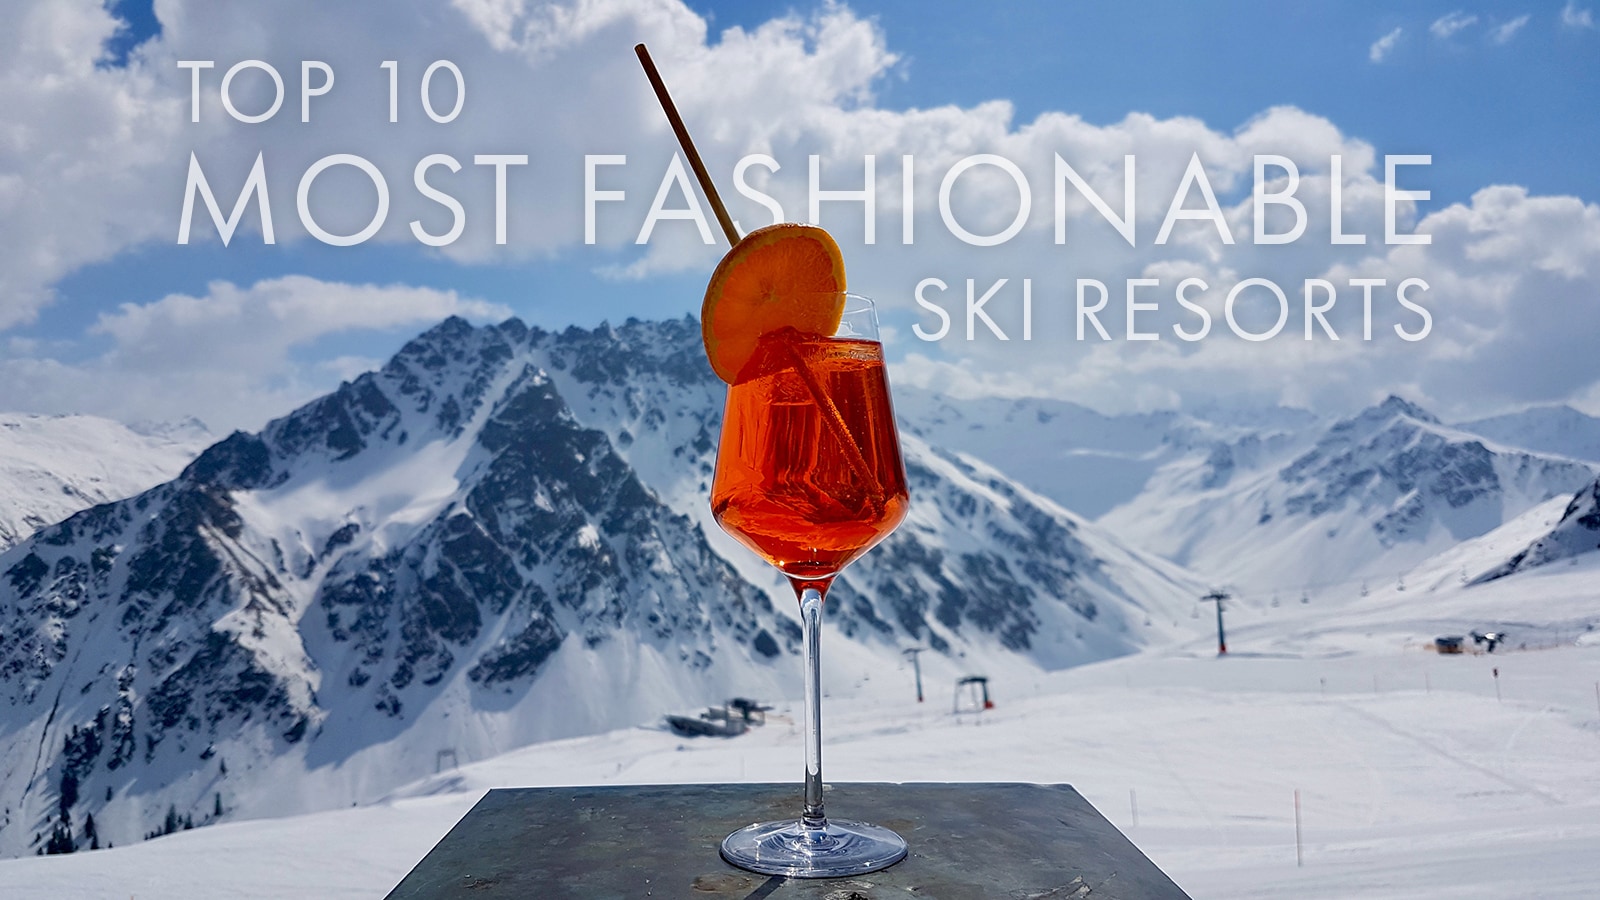 TOP 10 MOST FASHIONABLE SKI RESORTS IN THE WORLD